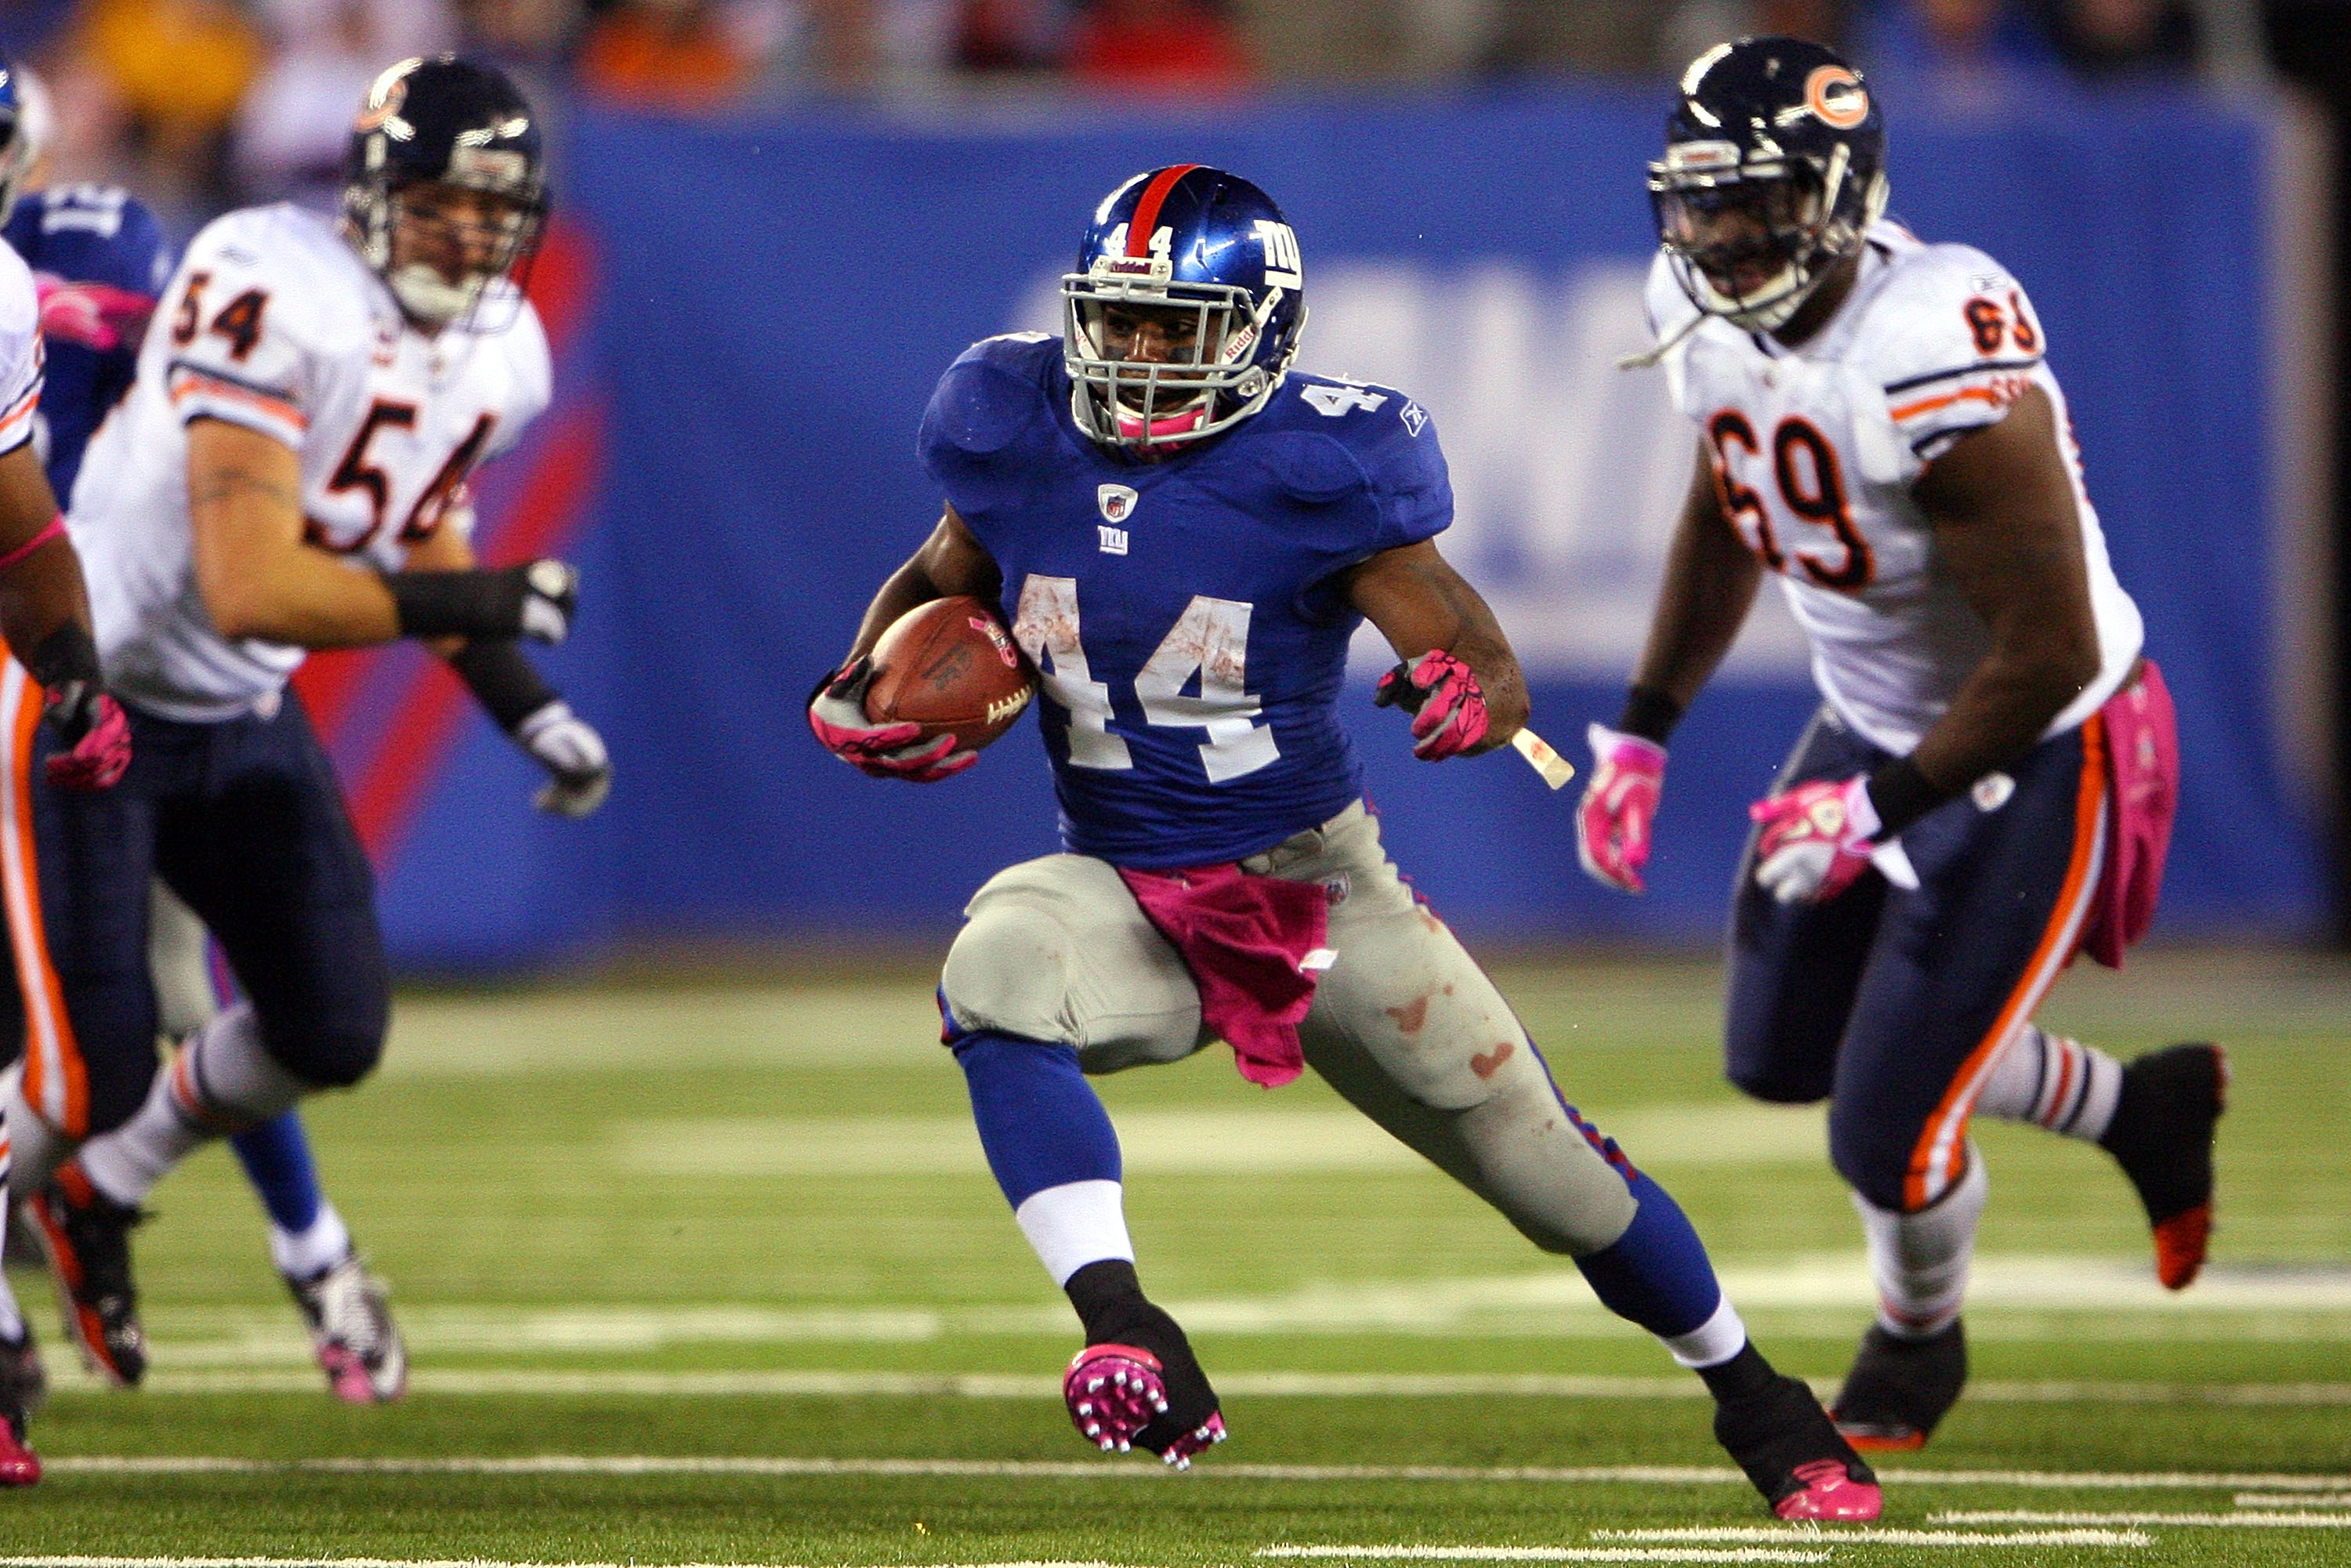 EAST RUTHERFORD, NJ - OCTOBER 03:  Ahmad Bradshaw #44 of the New York Giants runs the ball against the Chicago Bears at New Meadowlands Stadium on October 3, 2010 in East Rutherford, New Jersey.  (Photo by Andrew Burton/Getty Images)